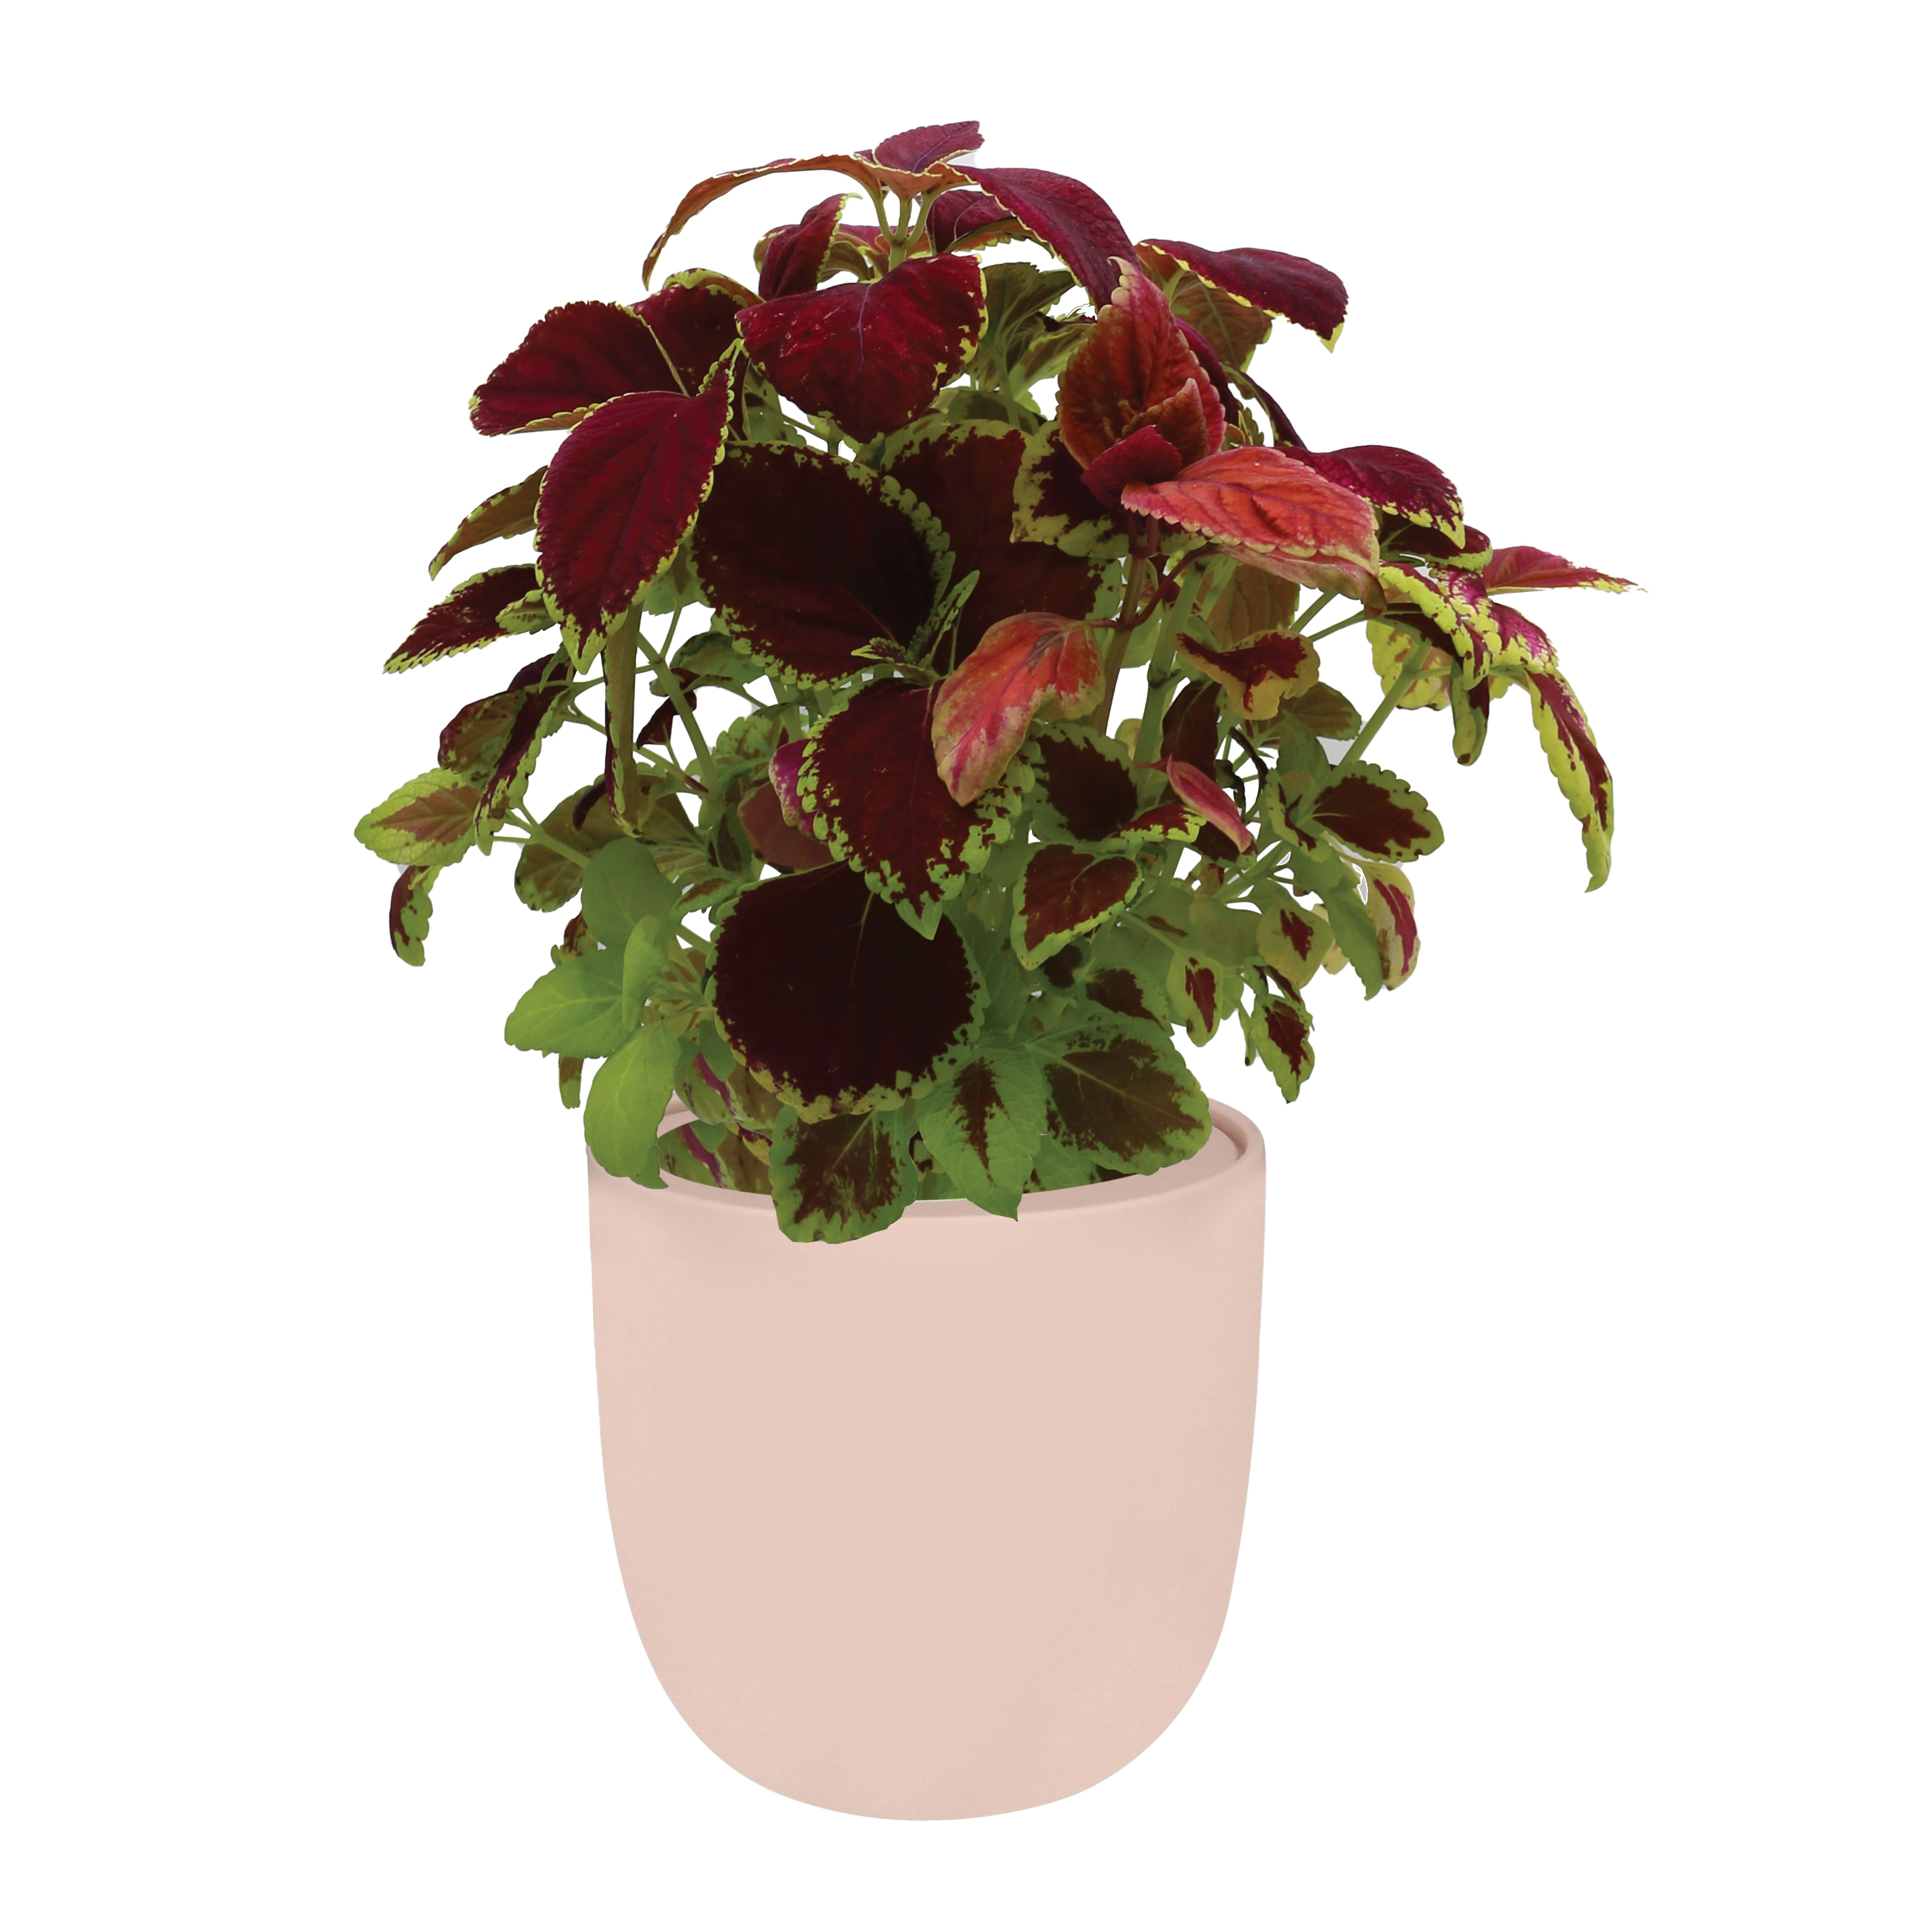 Coleus Pink Ceramic Pot Hydroponic Growing Kit with Seeds